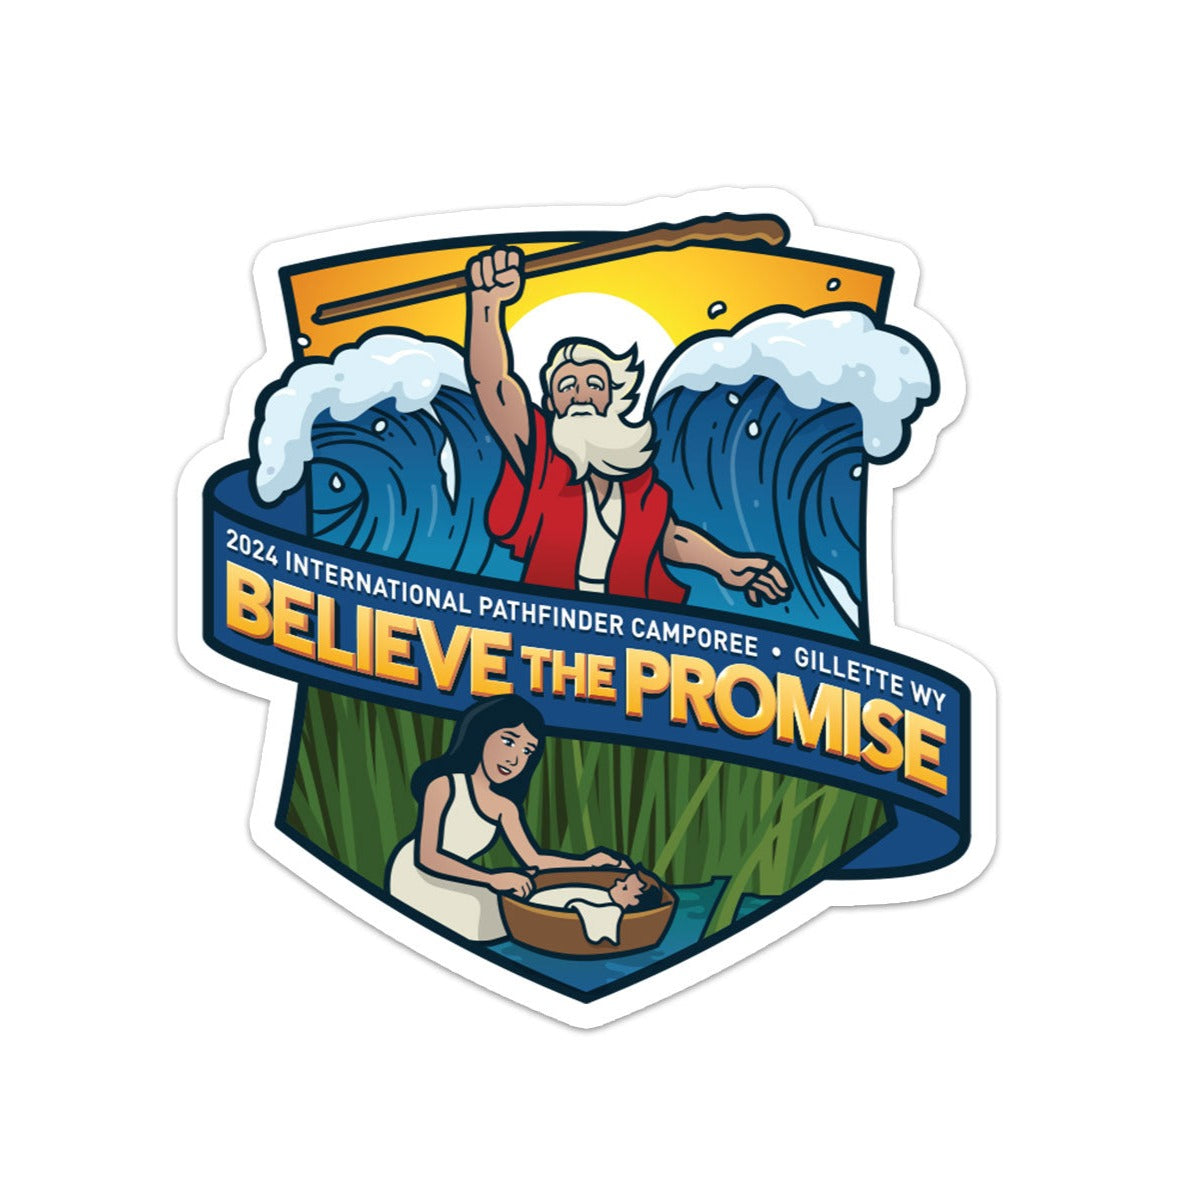 Believe The Promise Camporee 2024 Sticker Pinfinder